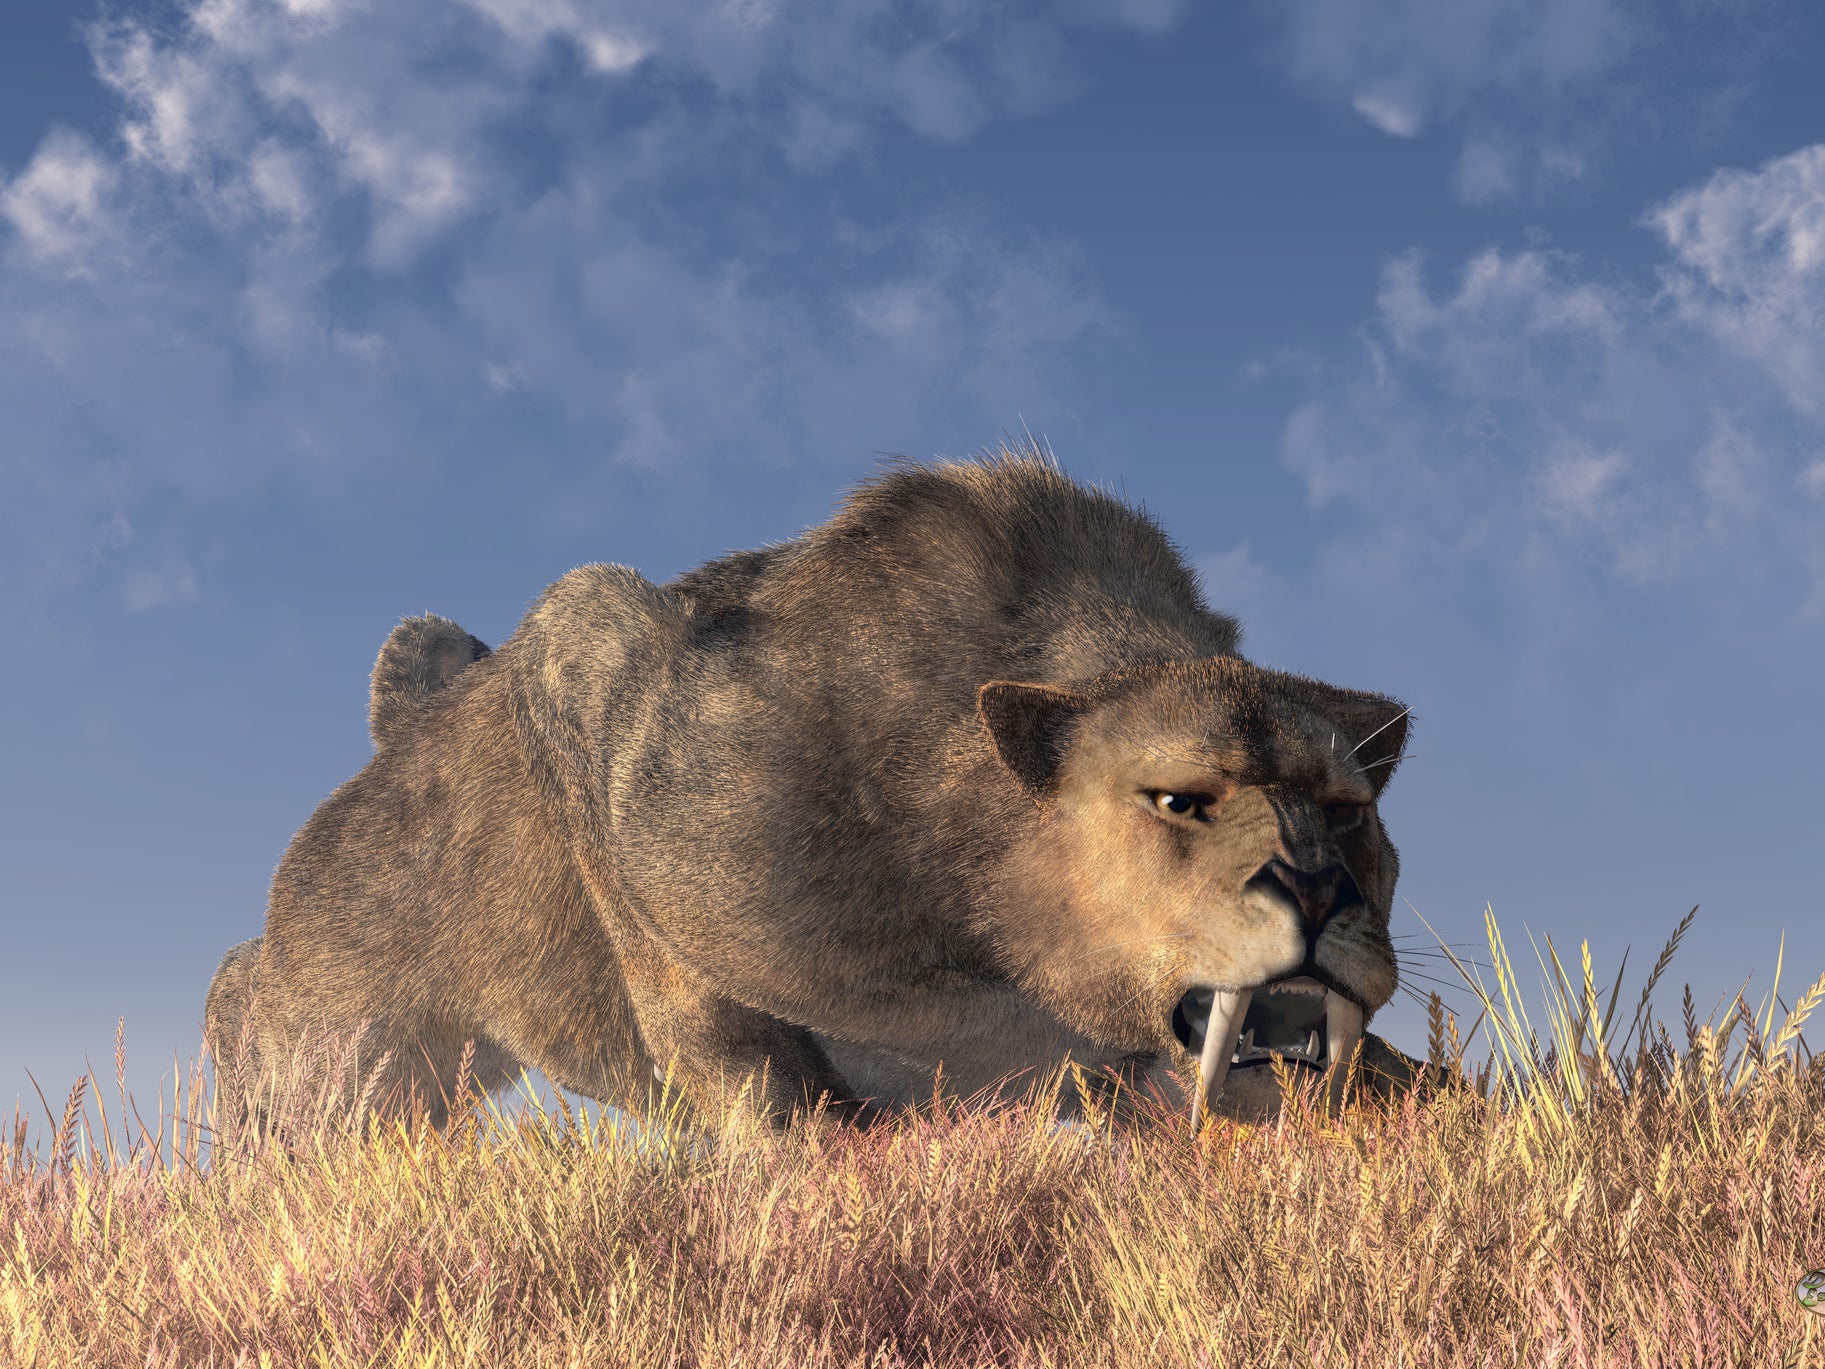 Artist's impression of a saber-toothed cat